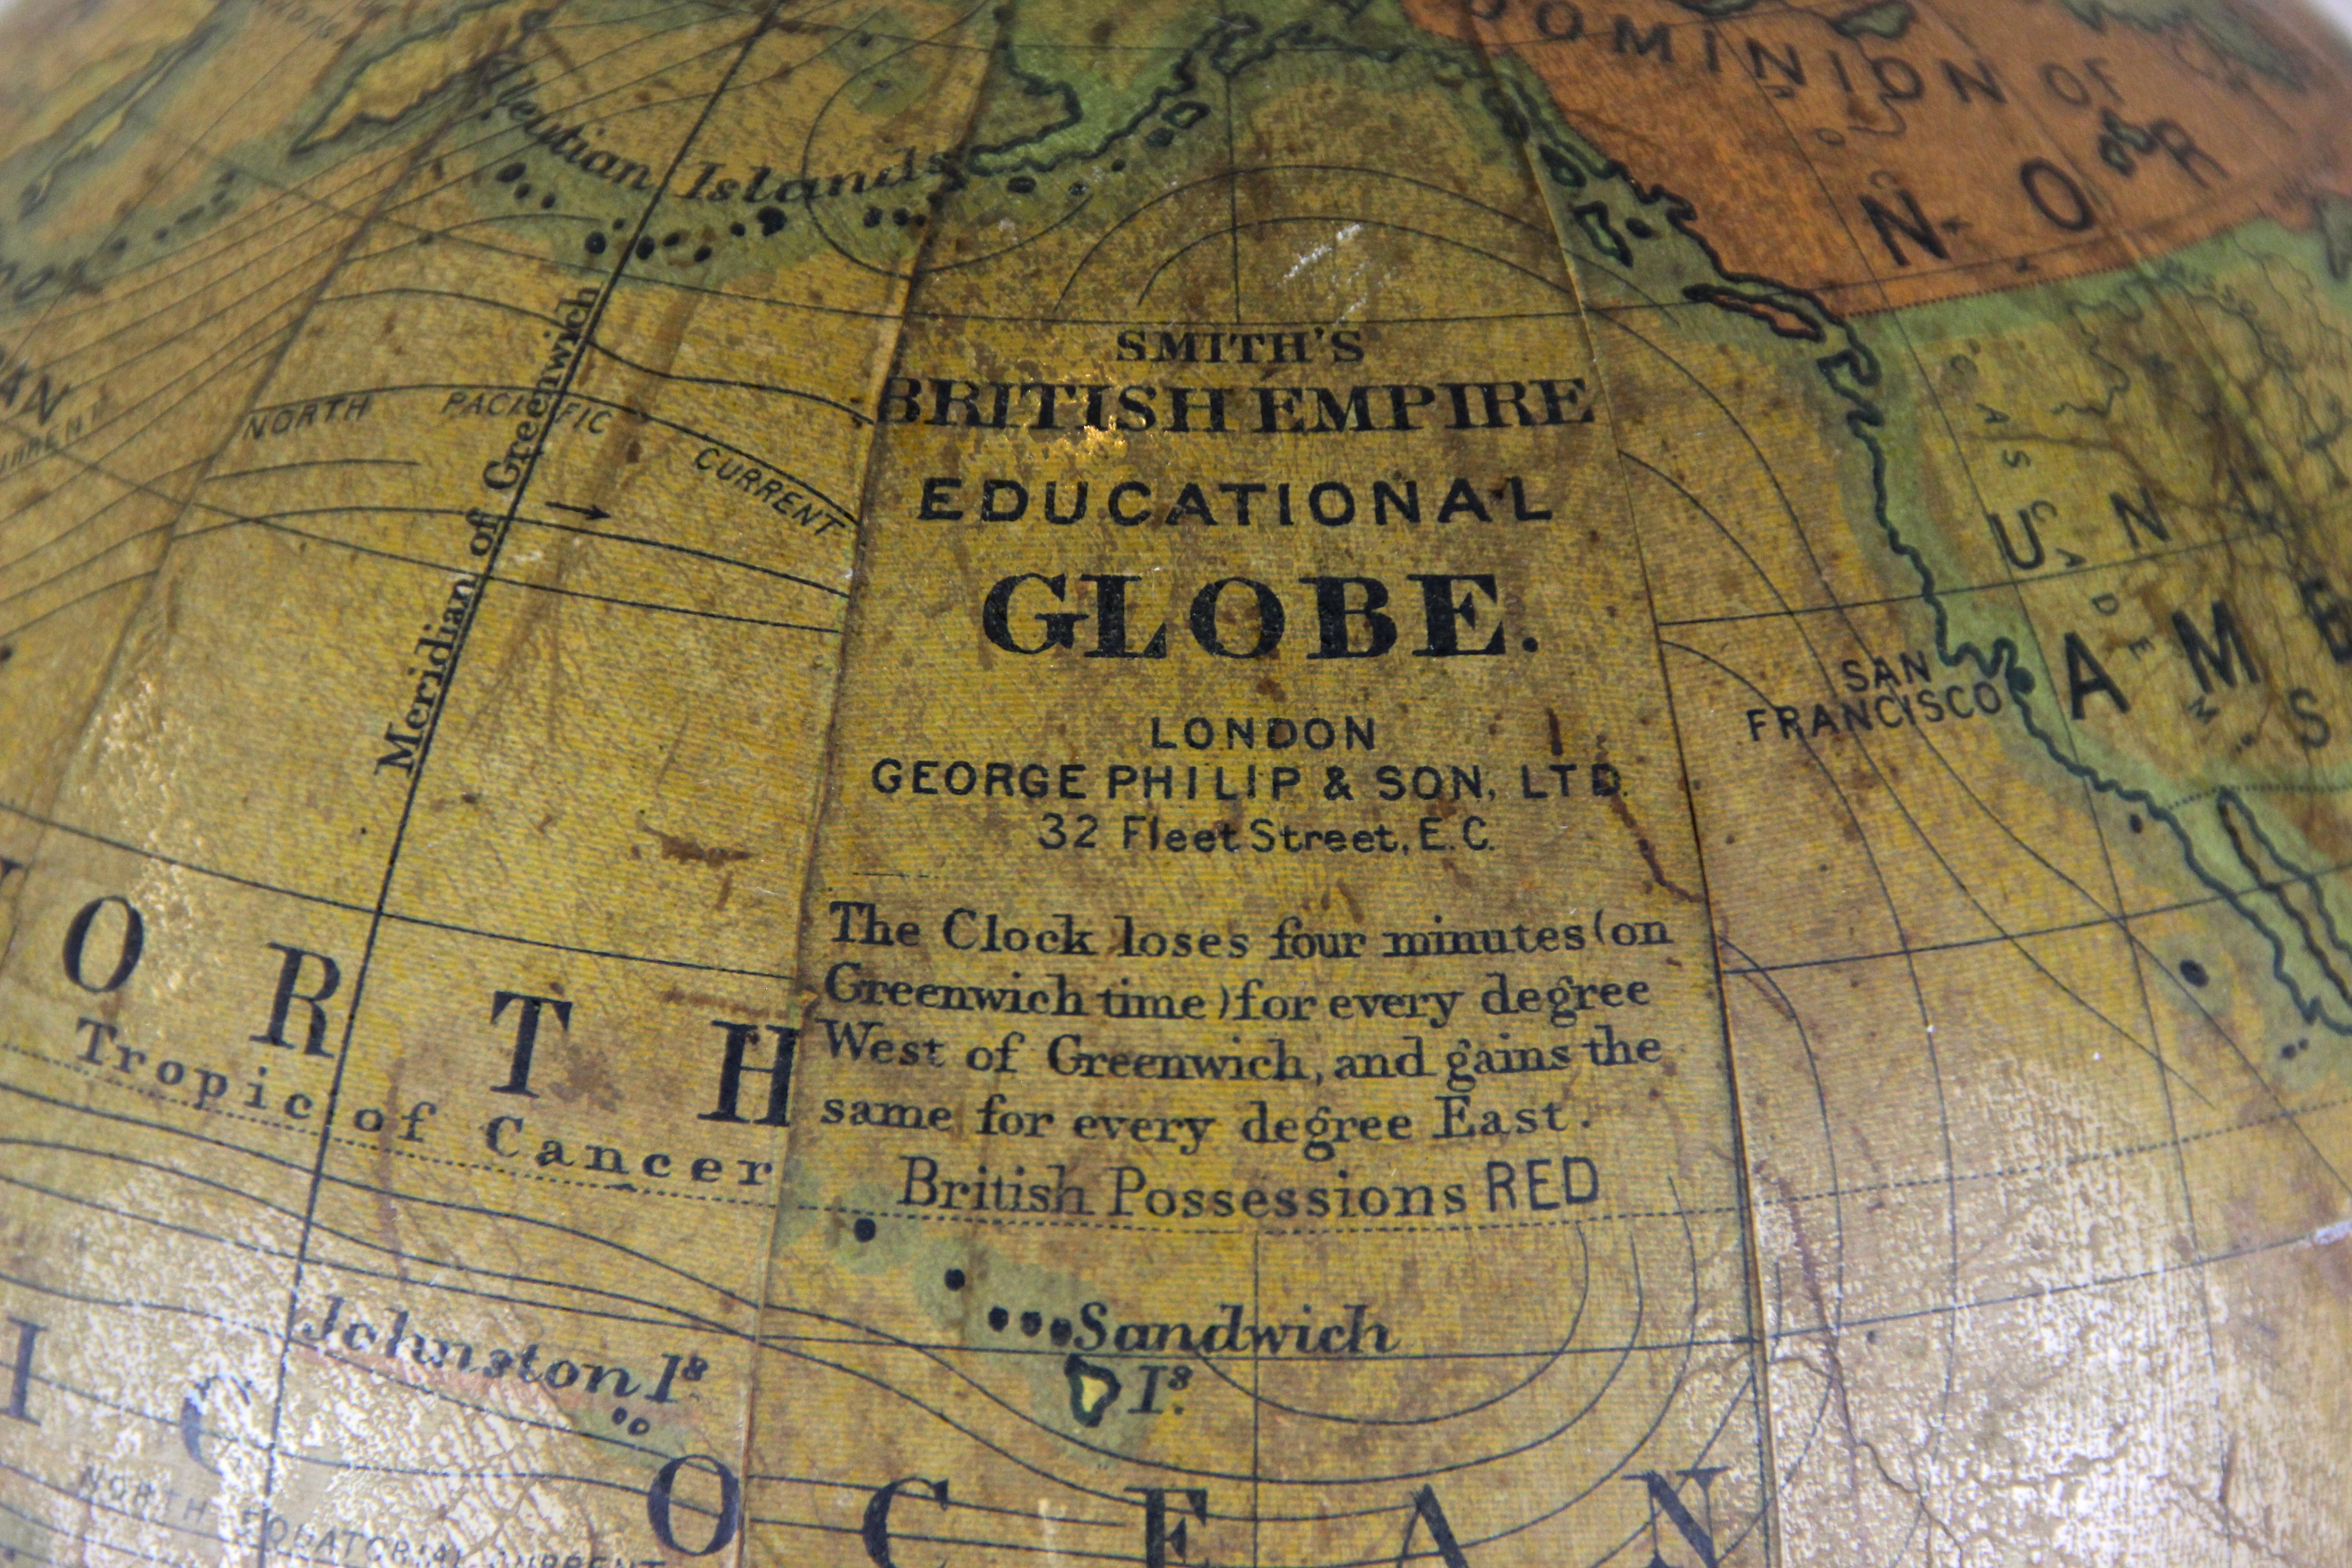 Exceptional 8 inch C. Smith´s British Empire Educational Globe artfully processed by George Philip & Son in London, circa 1890. Presented on the original ebonized base and upright, mounted in a half brass ring, this globe comprises of twelve coated